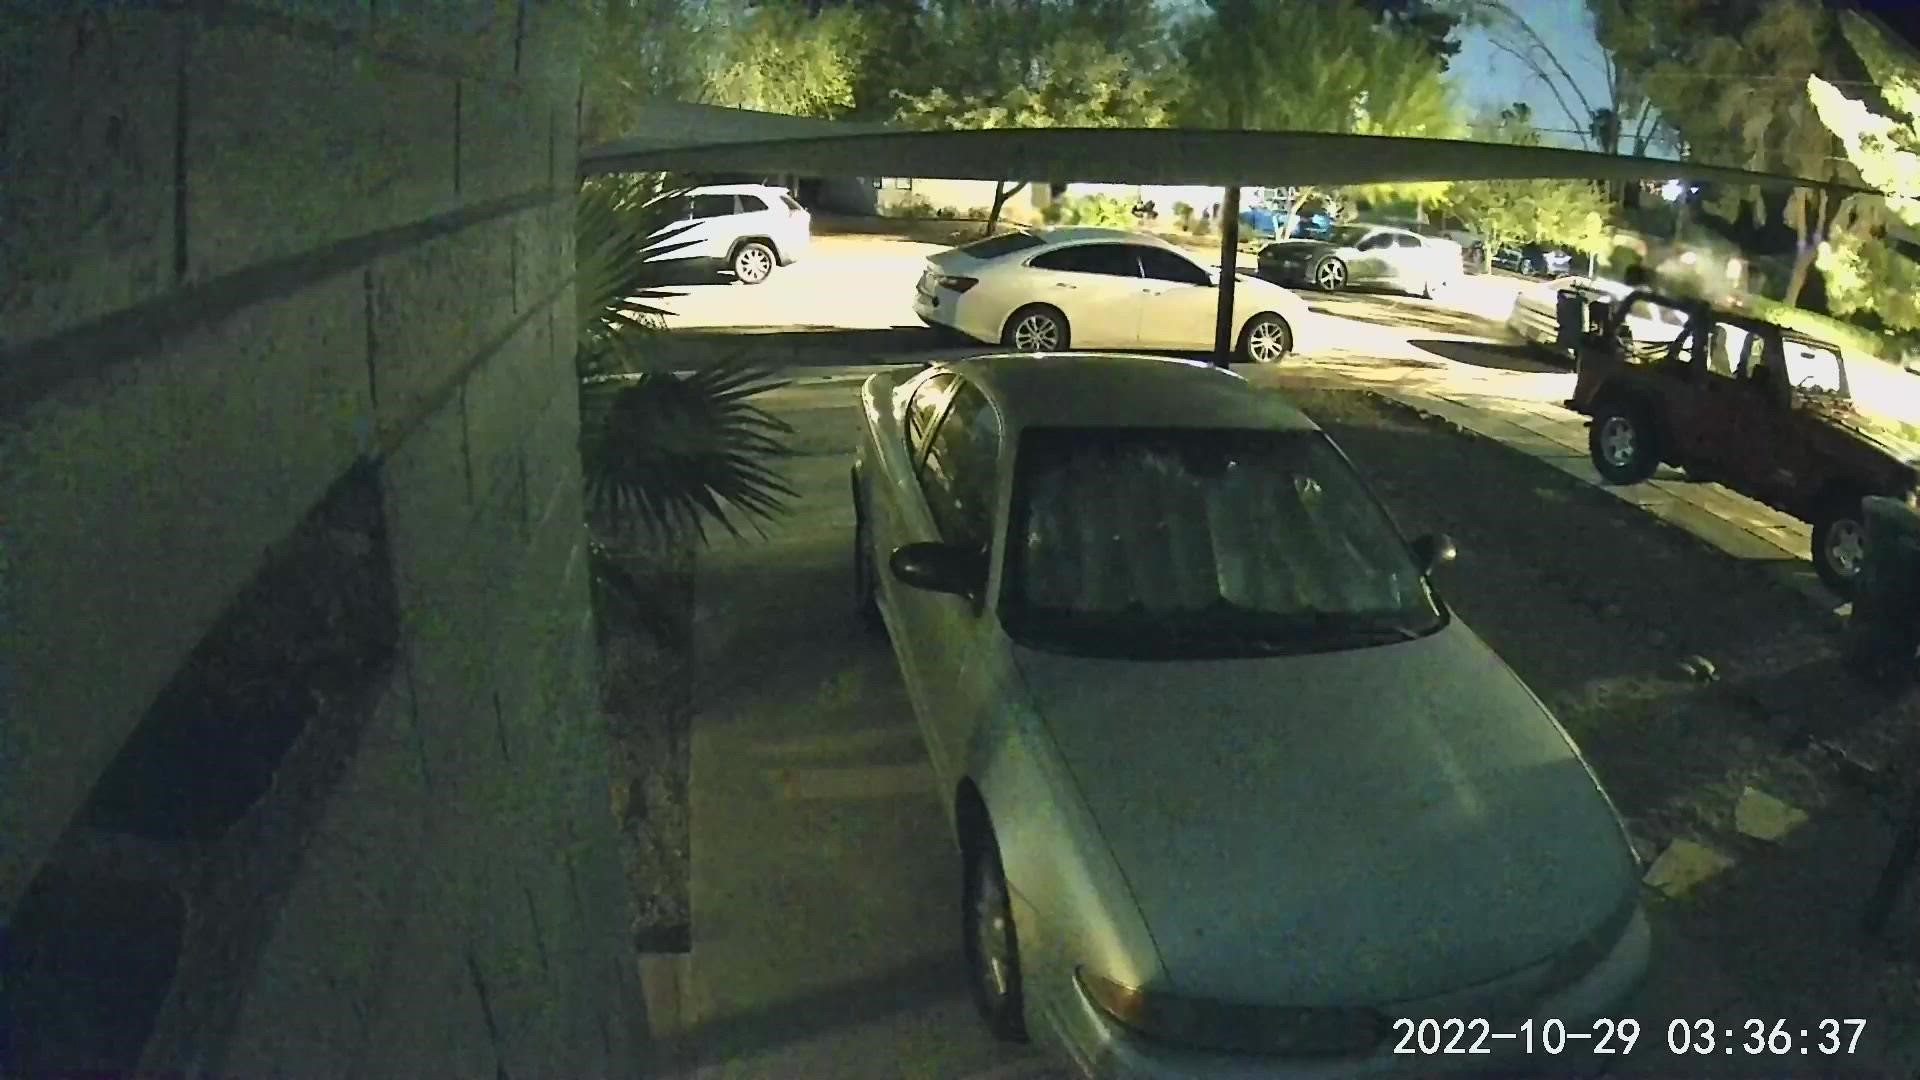 Security footage from a neighbor captured the moment that a group of unknown individuals opened fire during the incident.